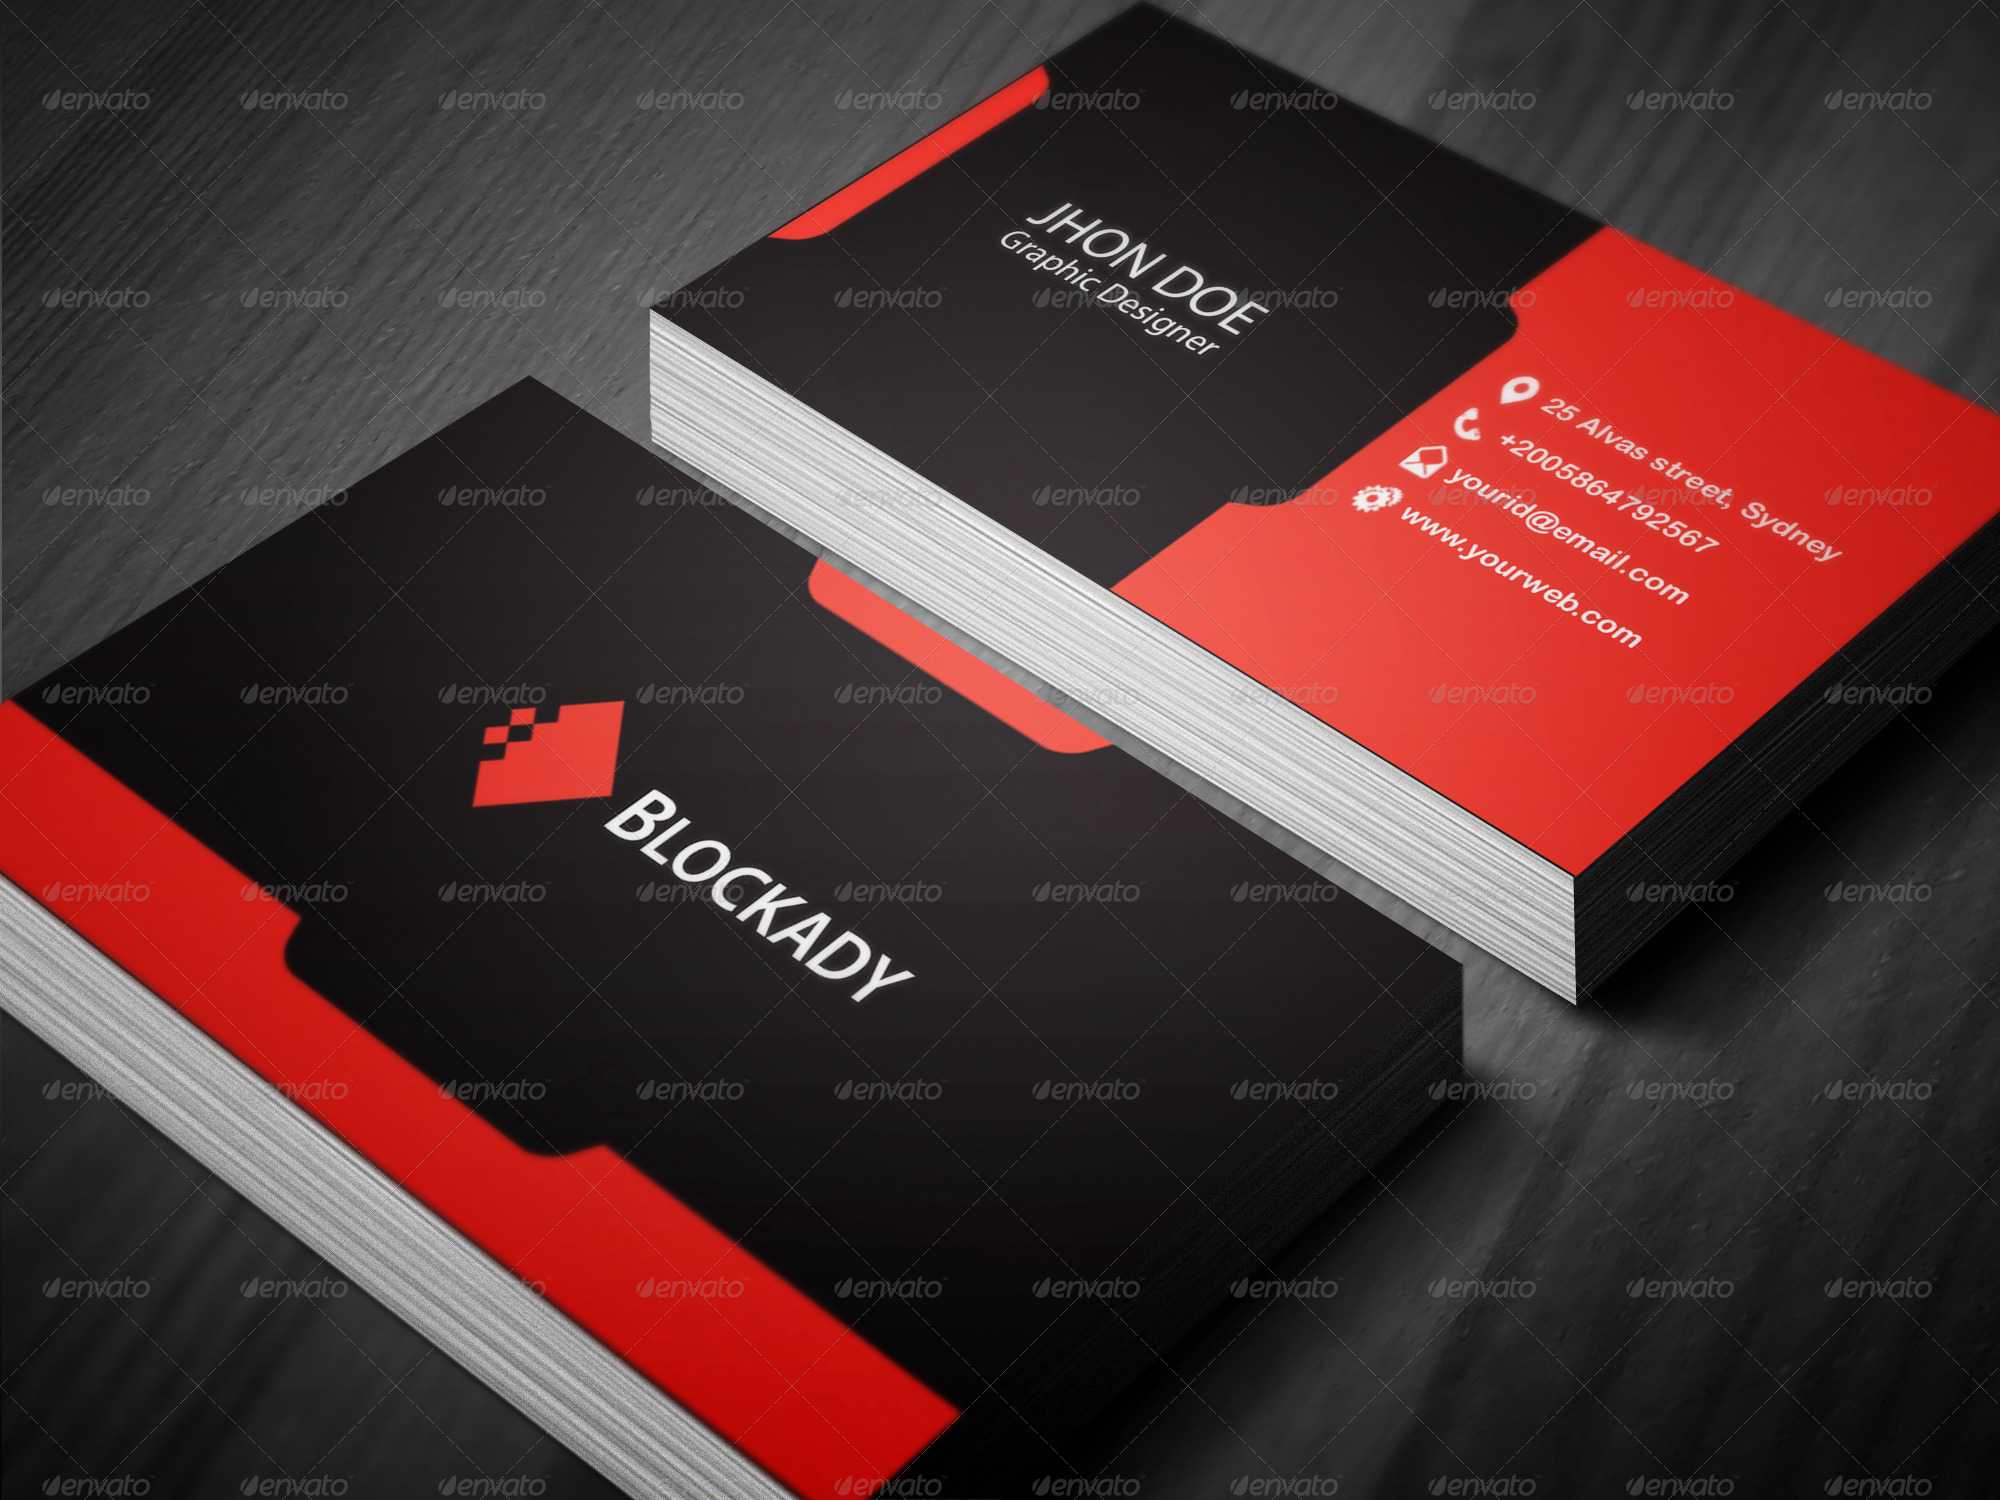 2 Colors Creative Business Card Template V.2 With Web Design Business Cards Templates